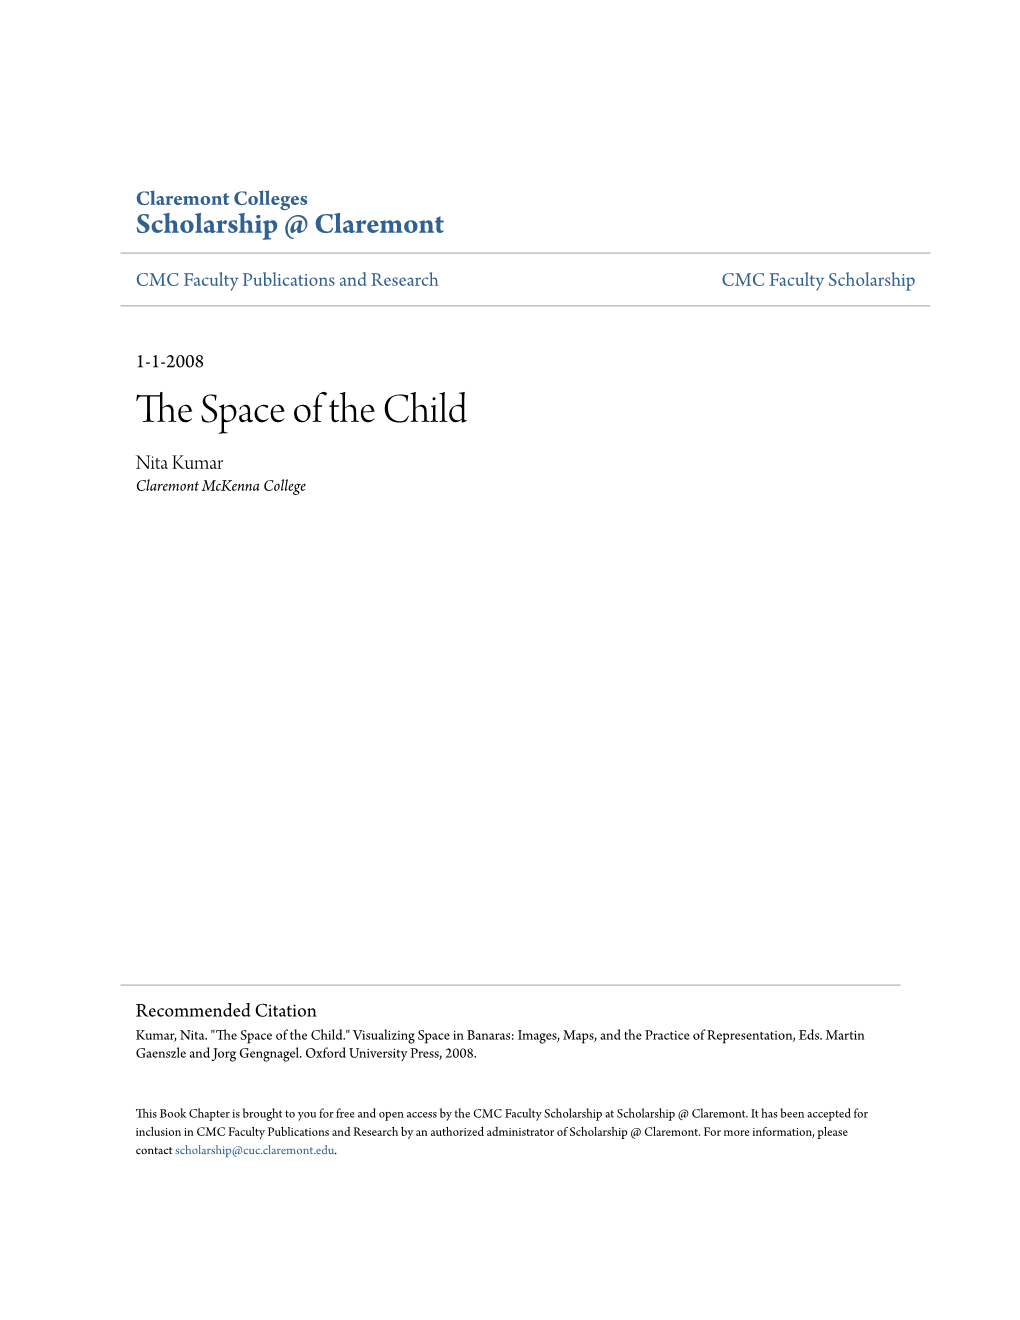 The Space of the Child